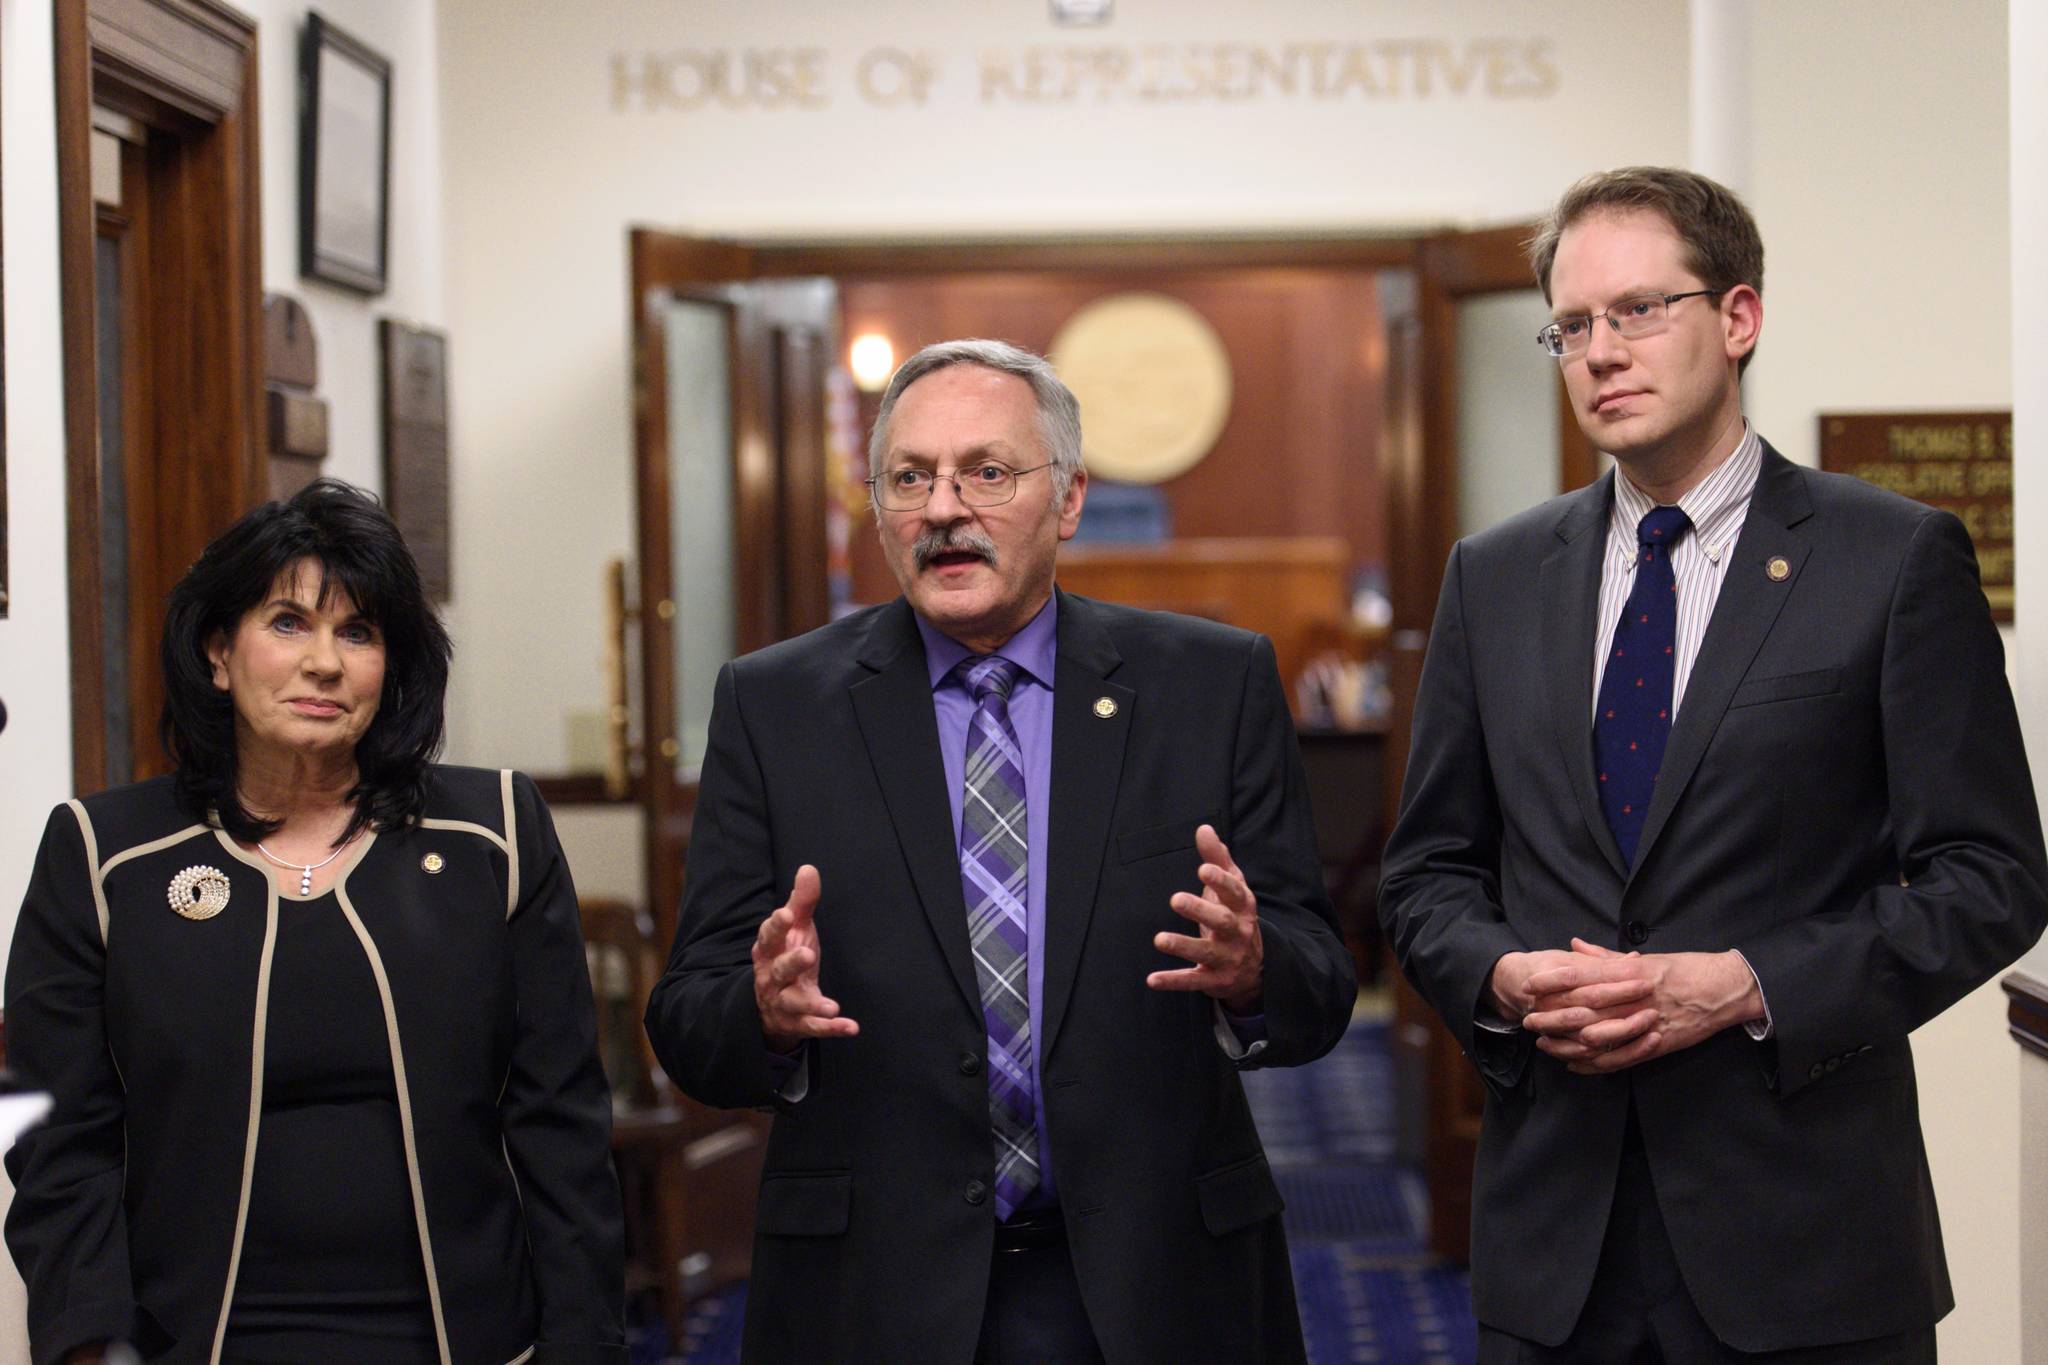 House Republicans Cathy Tilton, left, David Talerico, center, and Lance Pruitt speak to the press outside the House chambers after Gov. Mike Dunleavy’s State of the State speech on Tuesday. (Michael Penn | Juneau Empire)